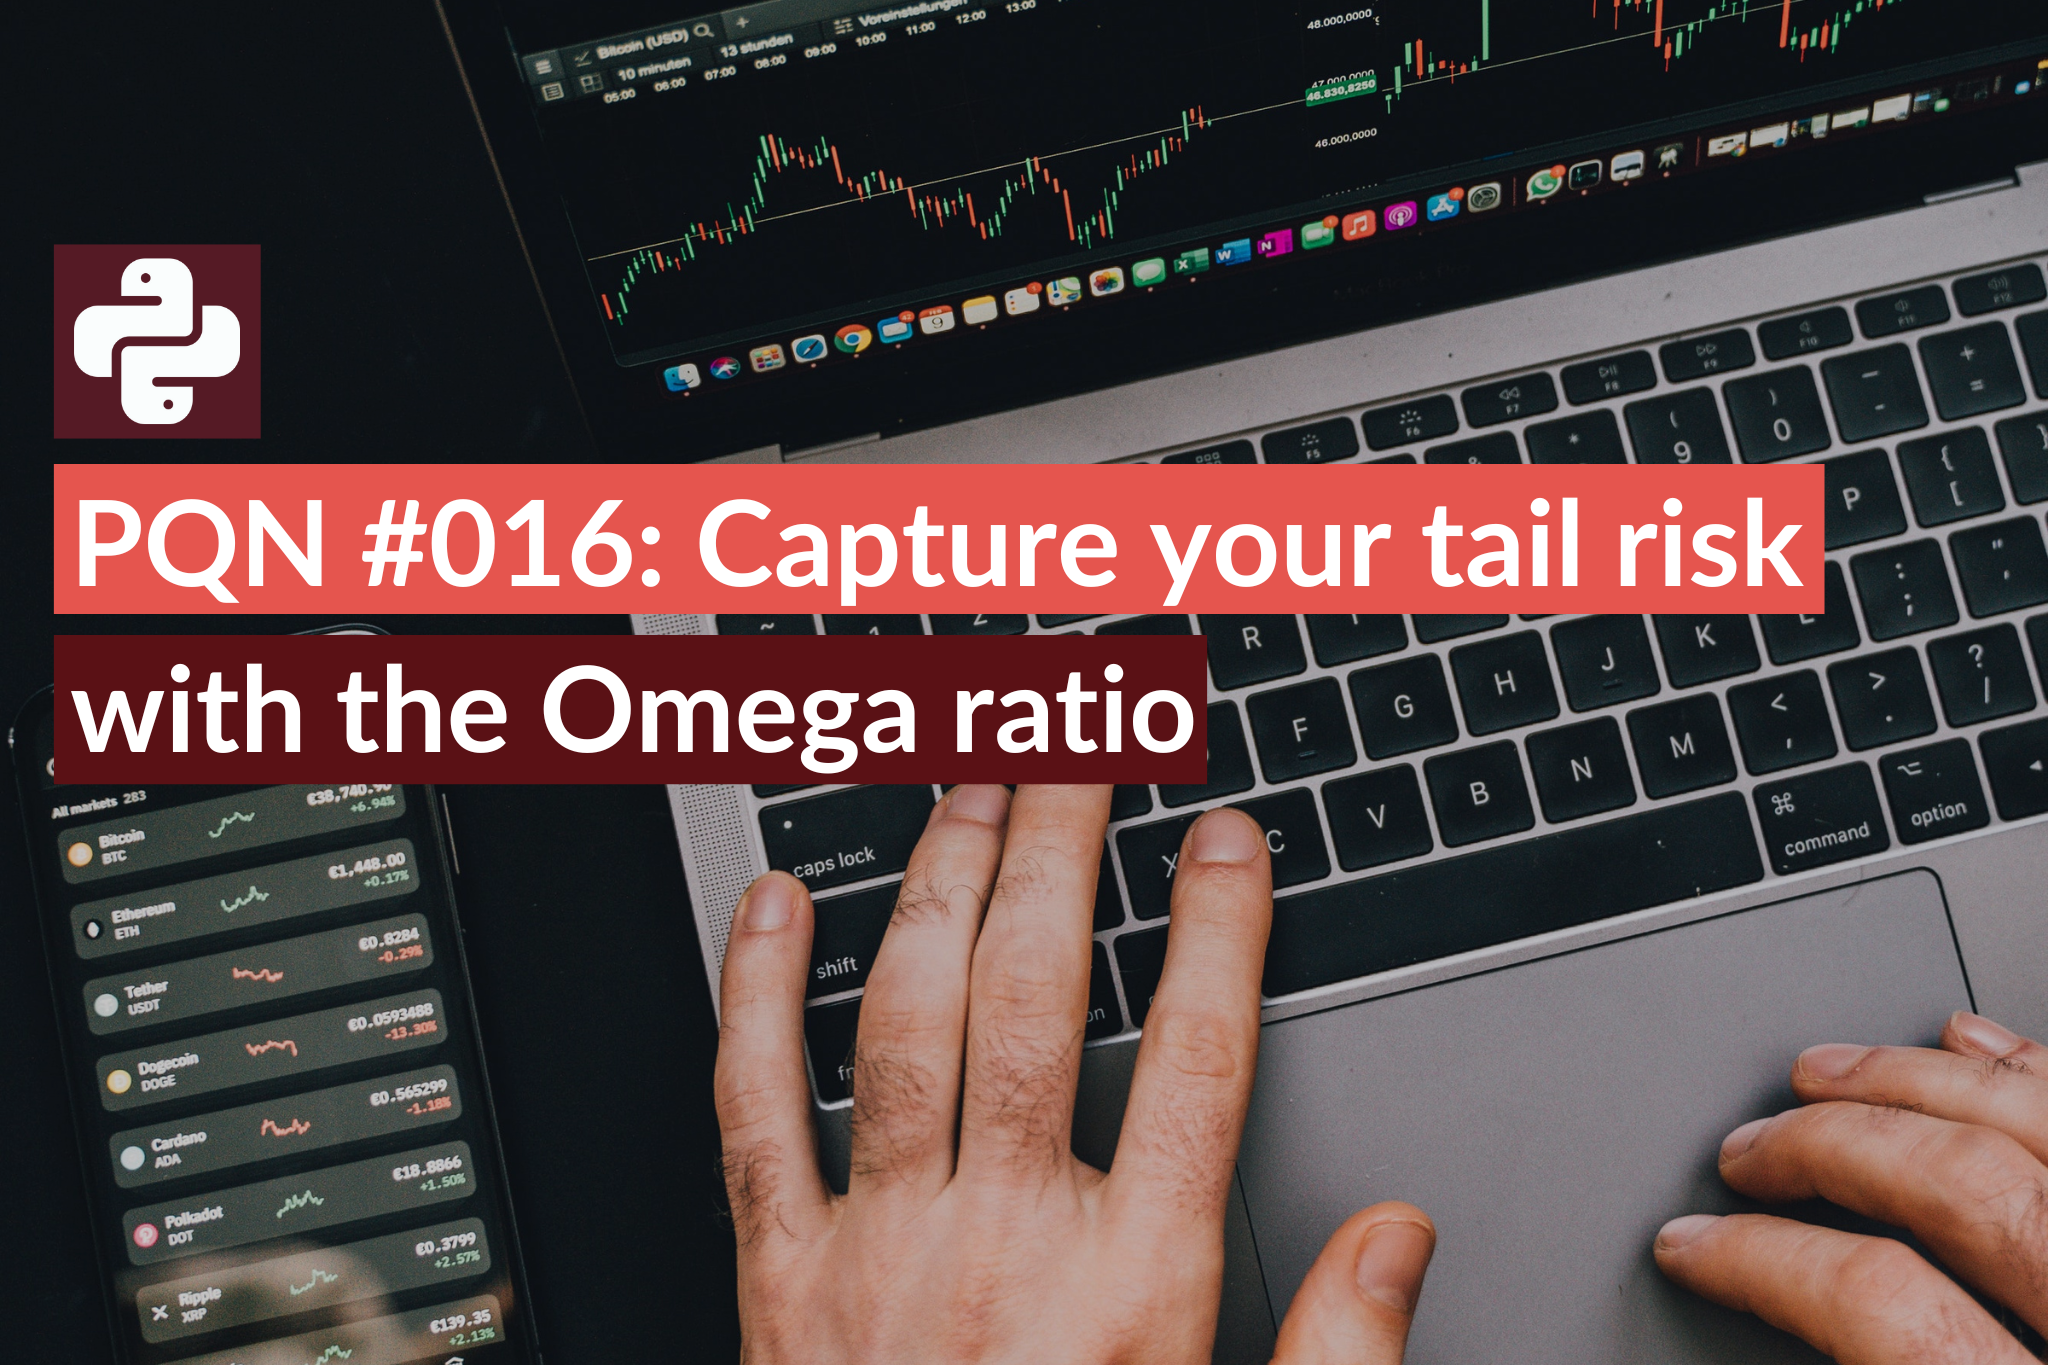 PQN #016 Capture your tail risk with the Omega ratio